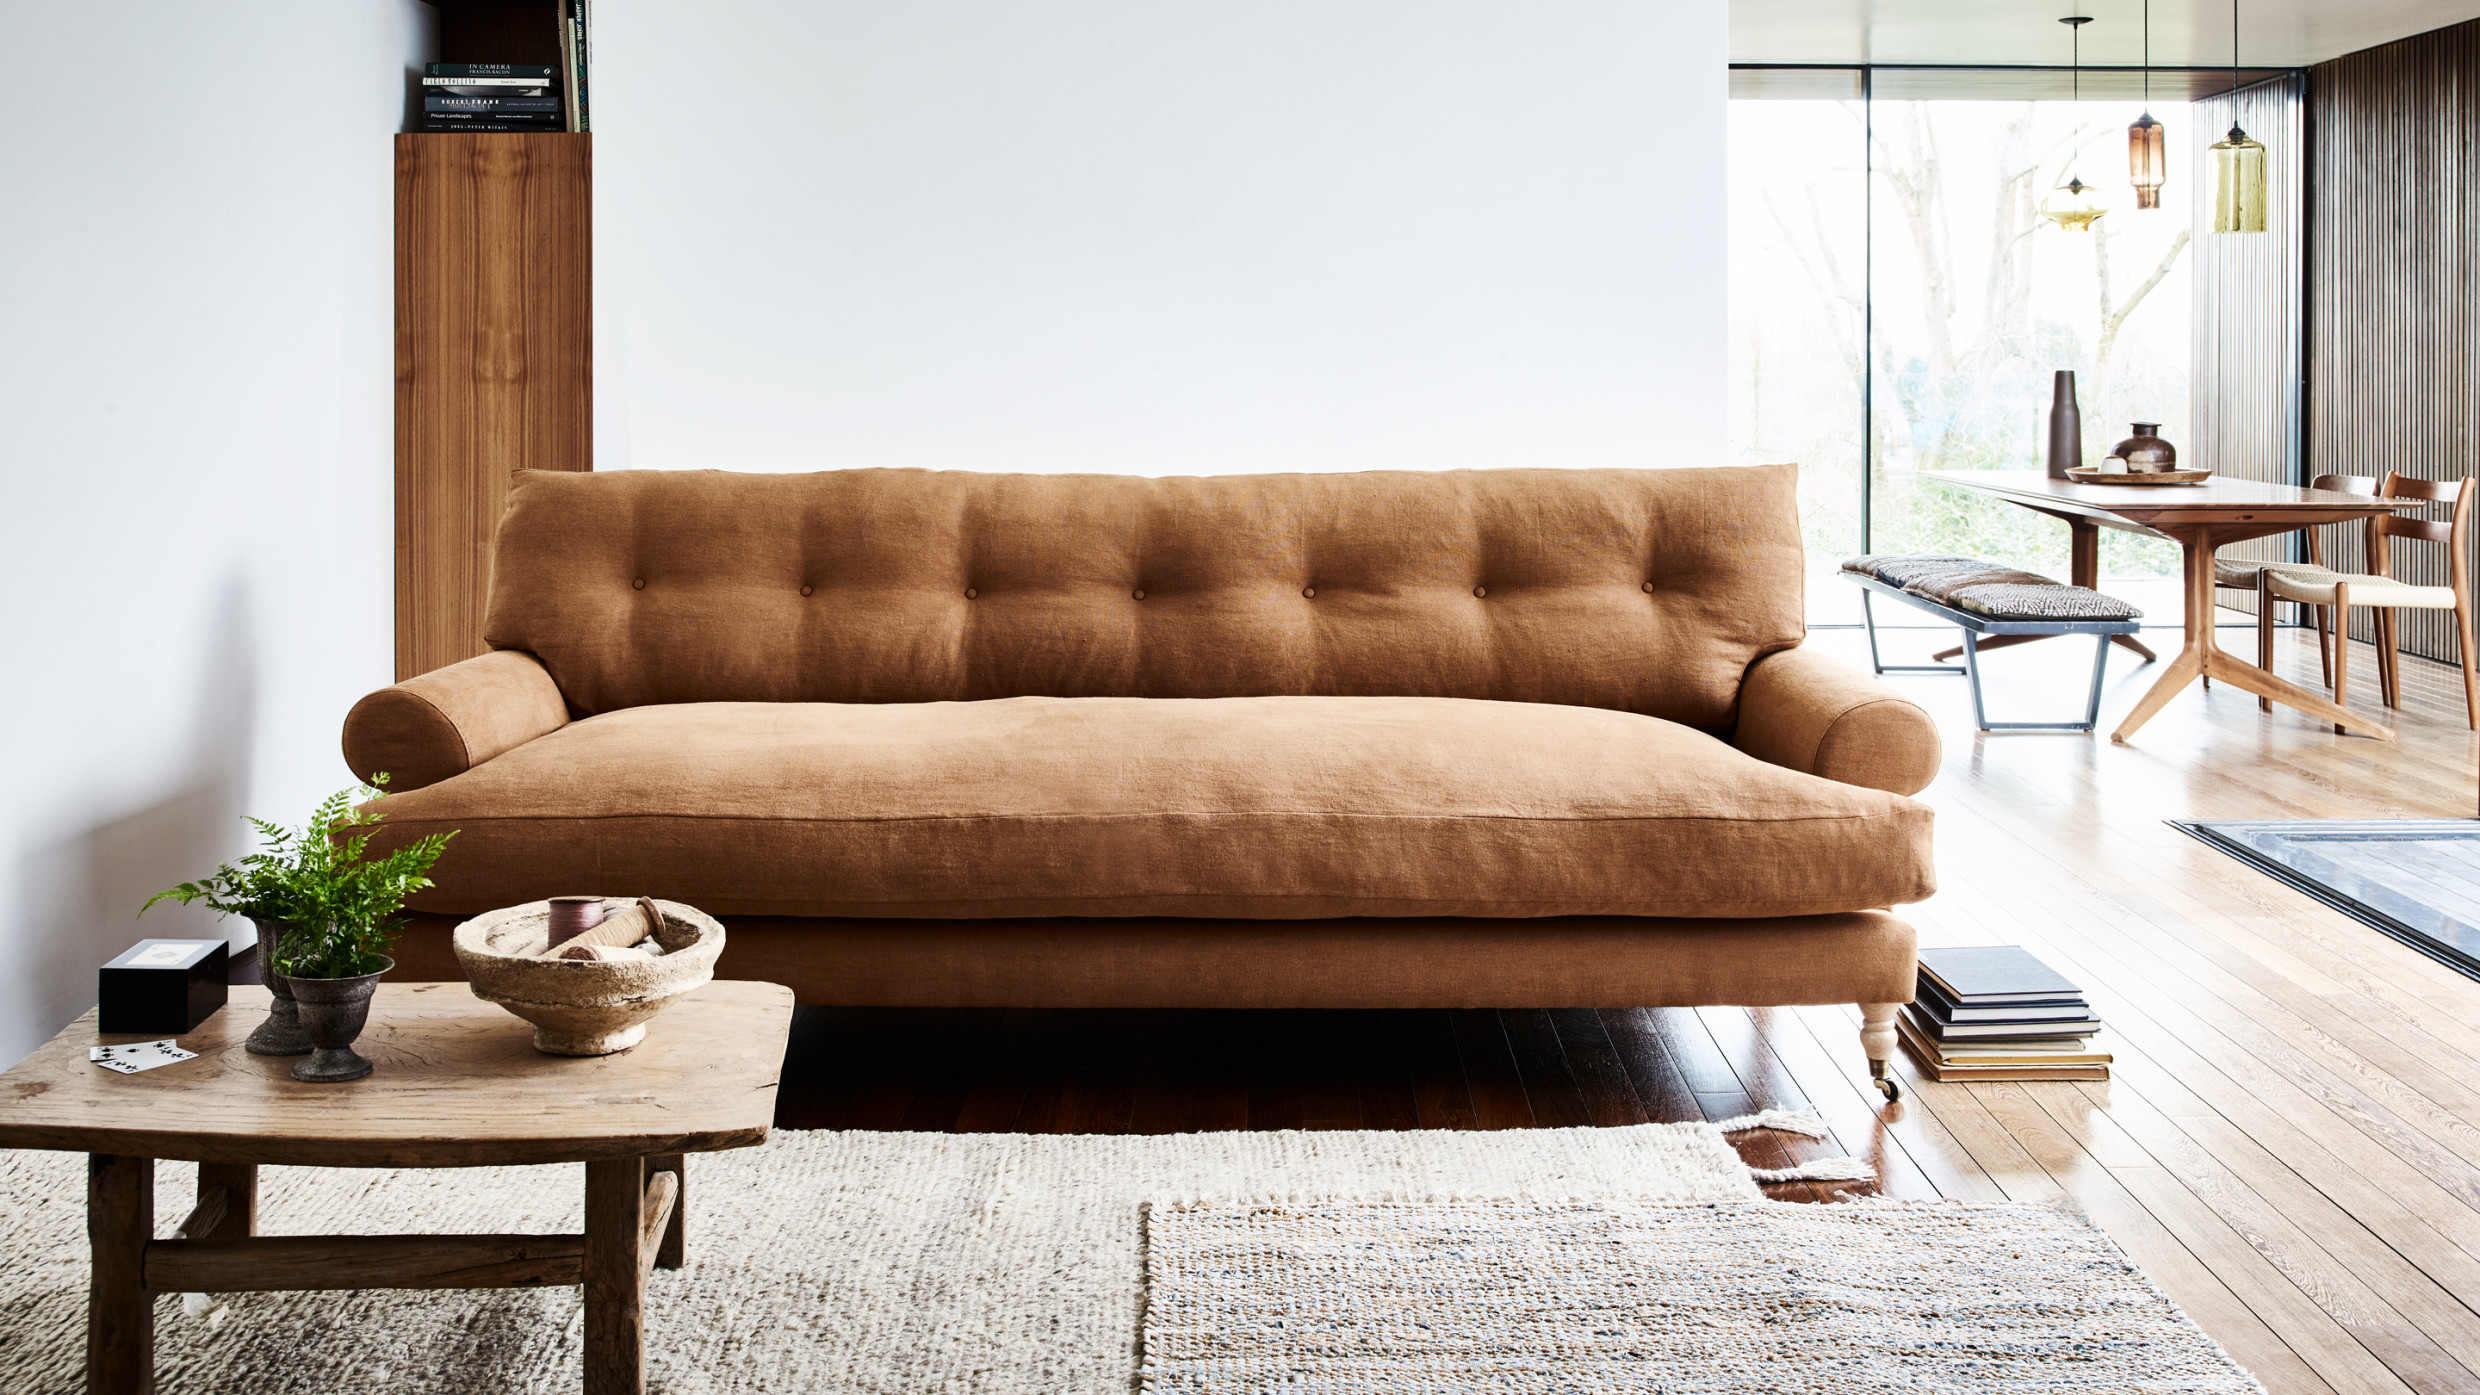 5 Ways to Style a Rented Sofa in Your Living Room